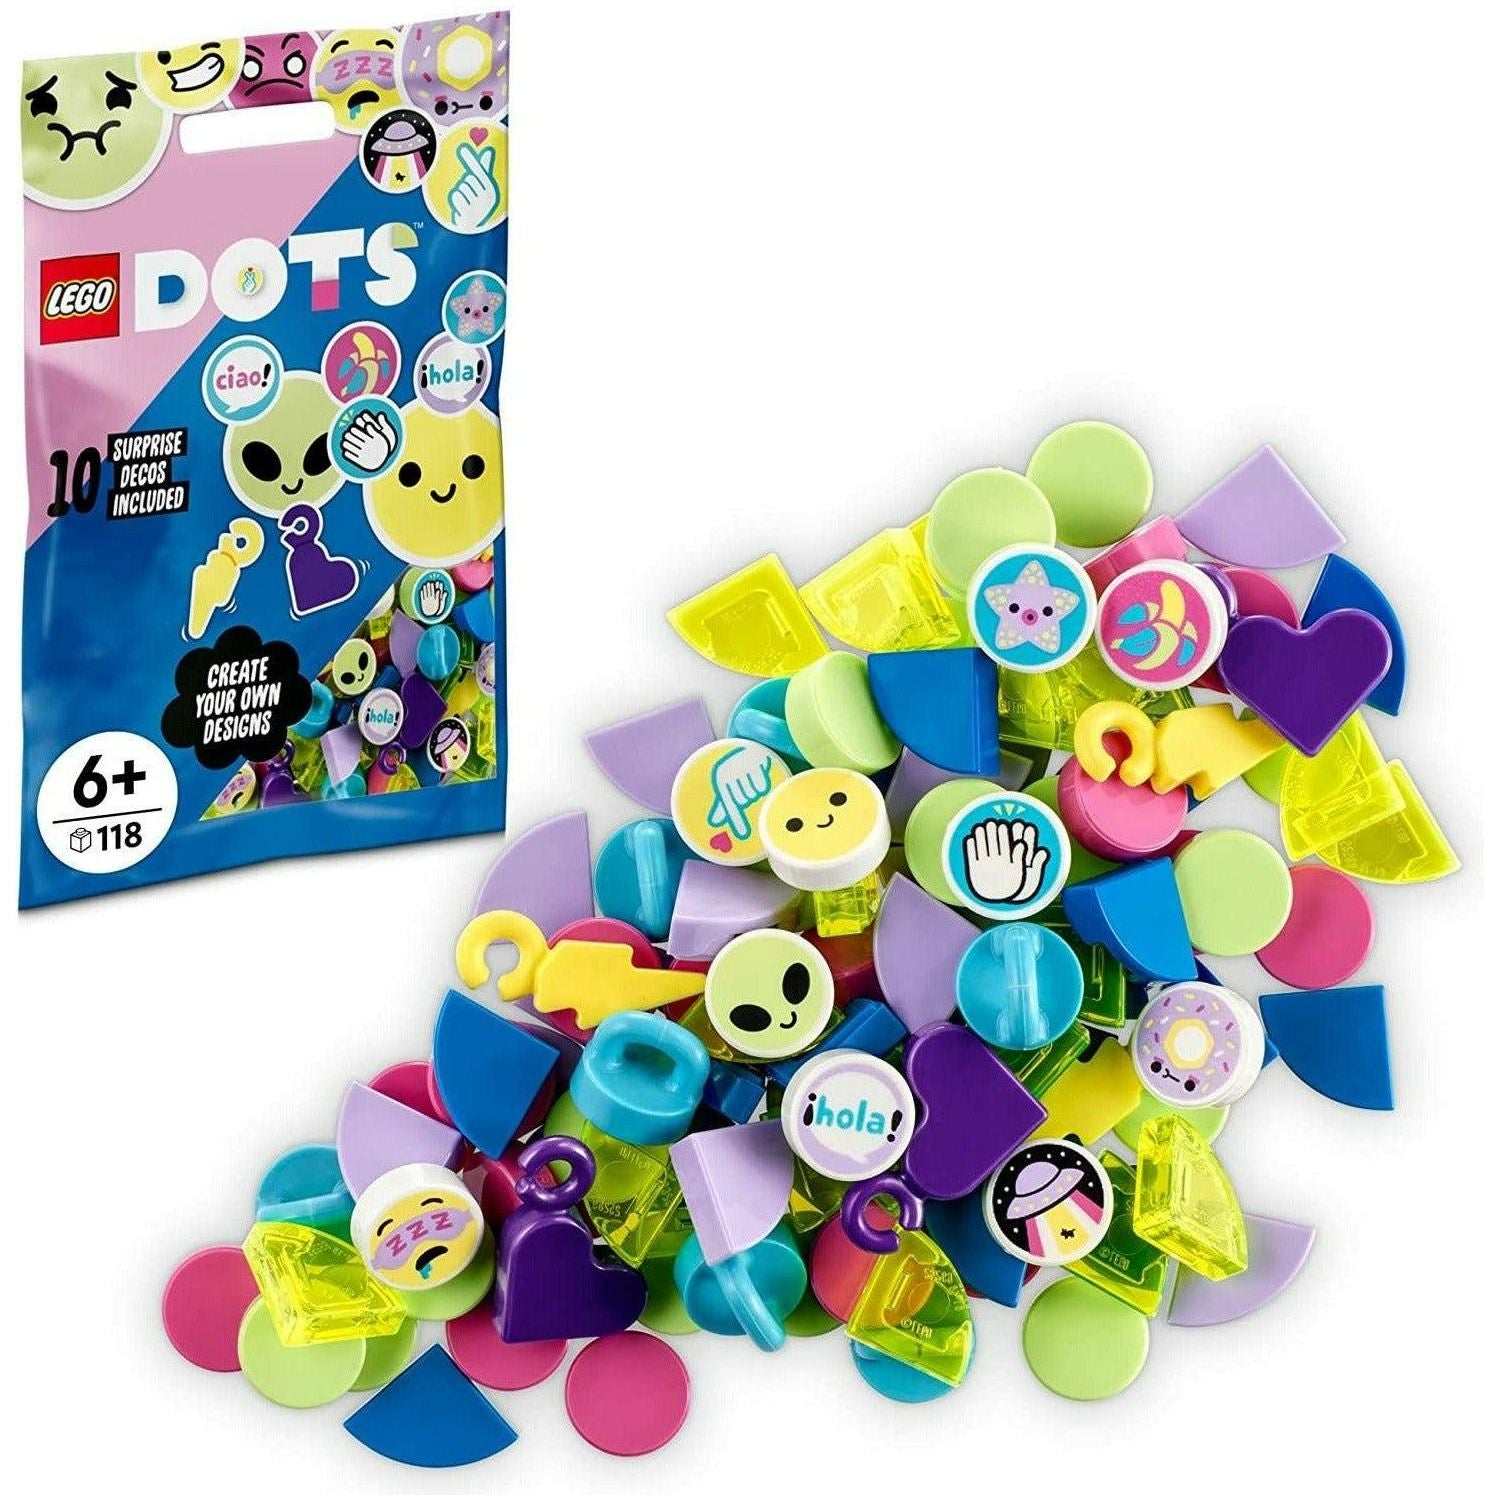 LEGO DOTS 41946 Extra DOTS - Series 6 Craft Decoration Kit 118 Pieces - BumbleToys - 6+ Years, 8-13 Years, Dots, LEGO, OXE